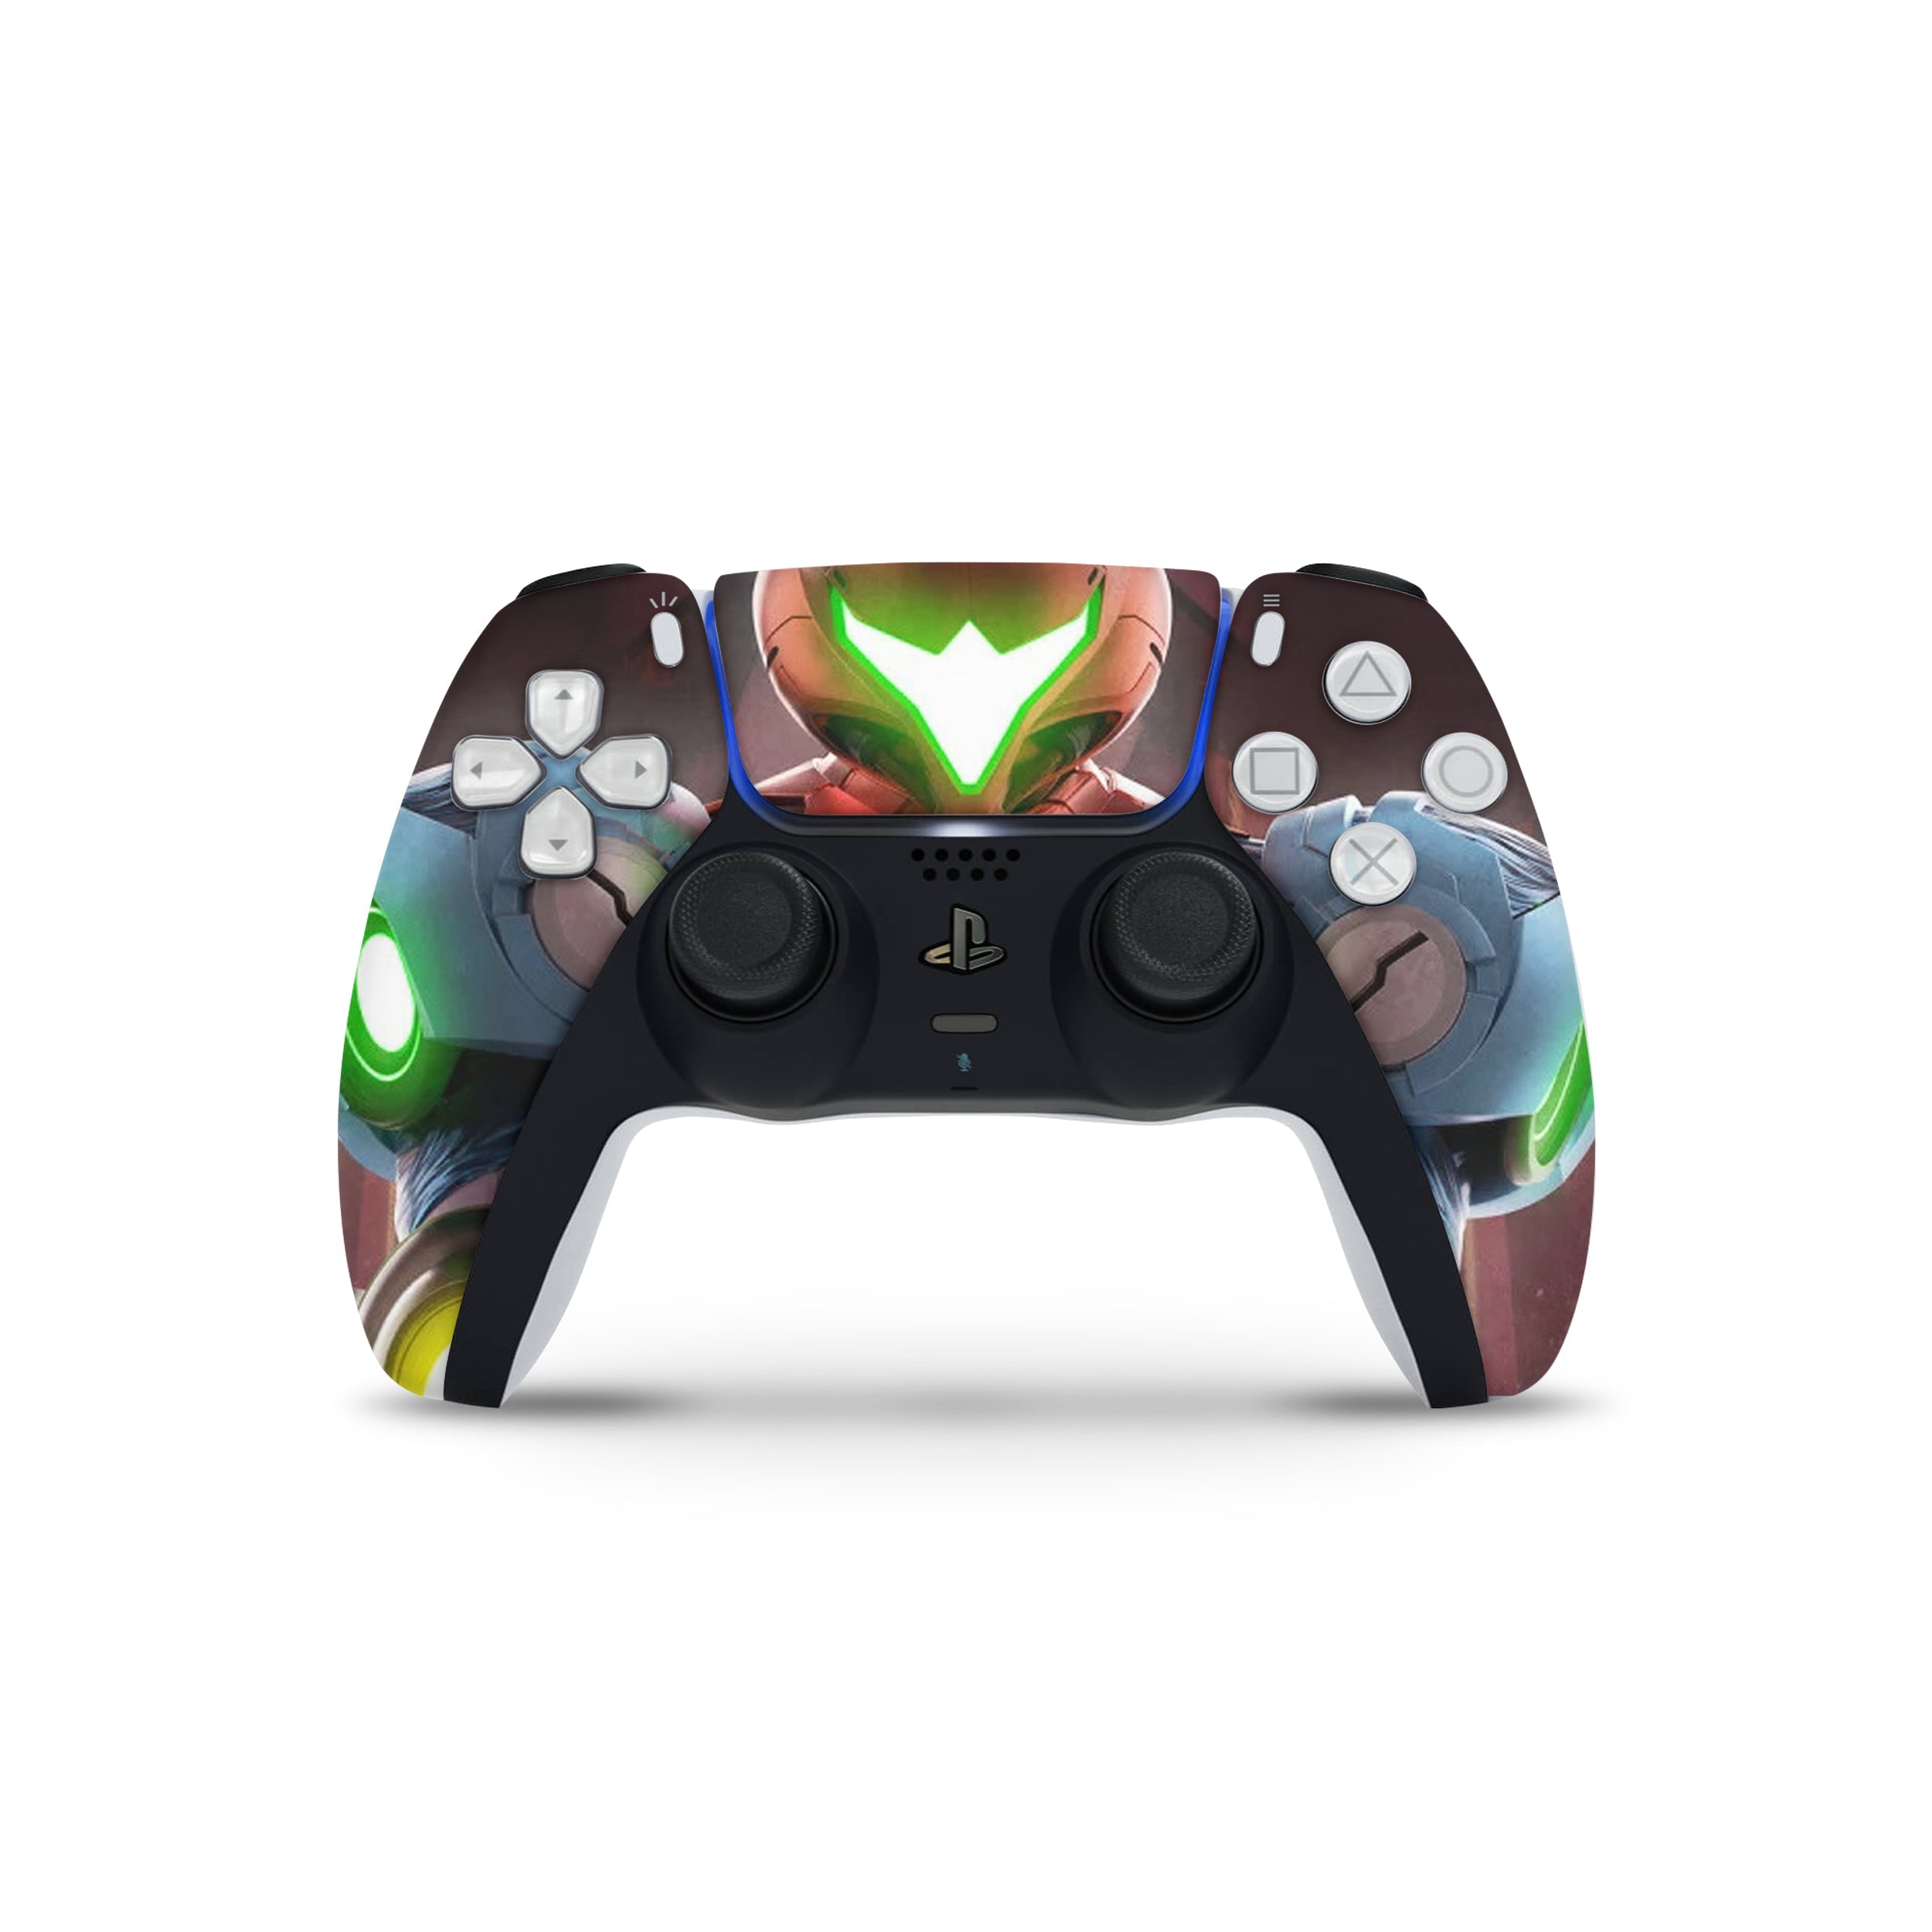 A video game skin featuring a Metroid Dread design for the PS5 DualSense Controller.